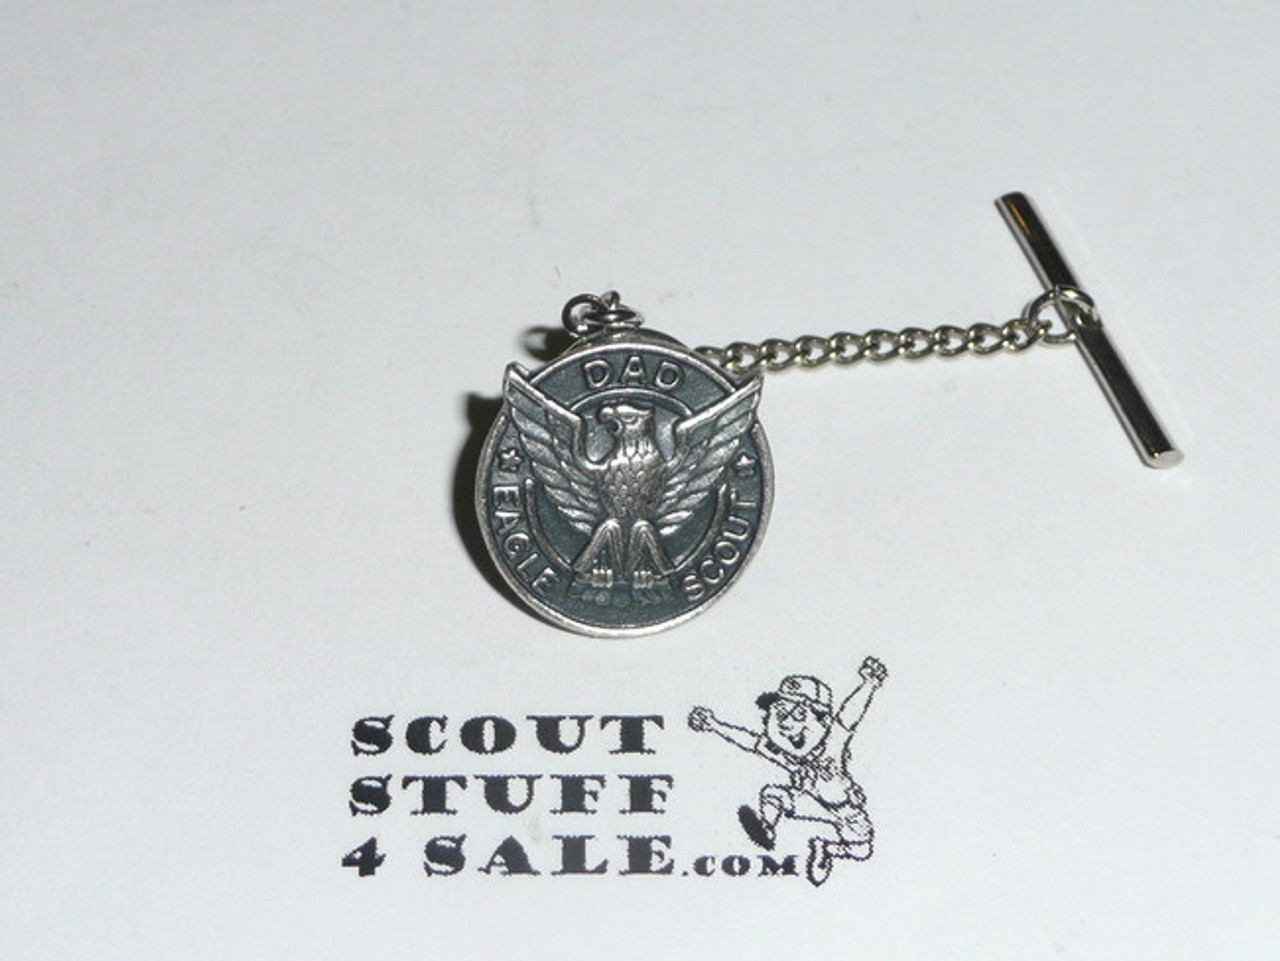 Eagle Scout Dad Tie Tack, Stange Hallmark, post missing from back